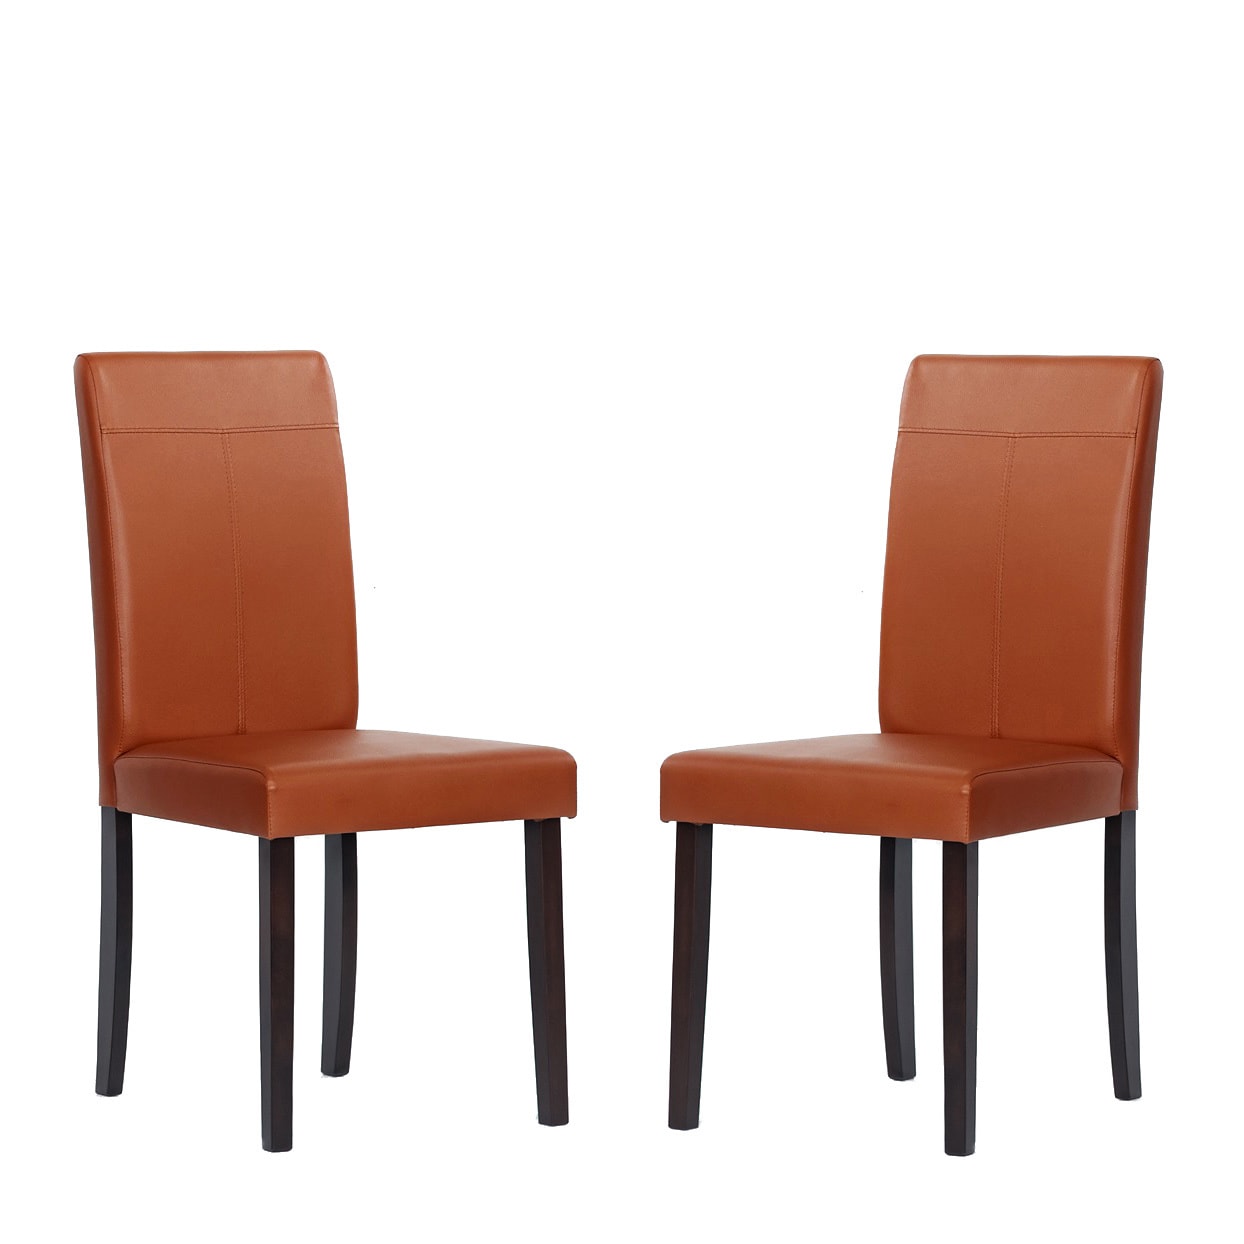 Warehouse Of Tiffany Toffee Dining Room Chairs (set Of 2)